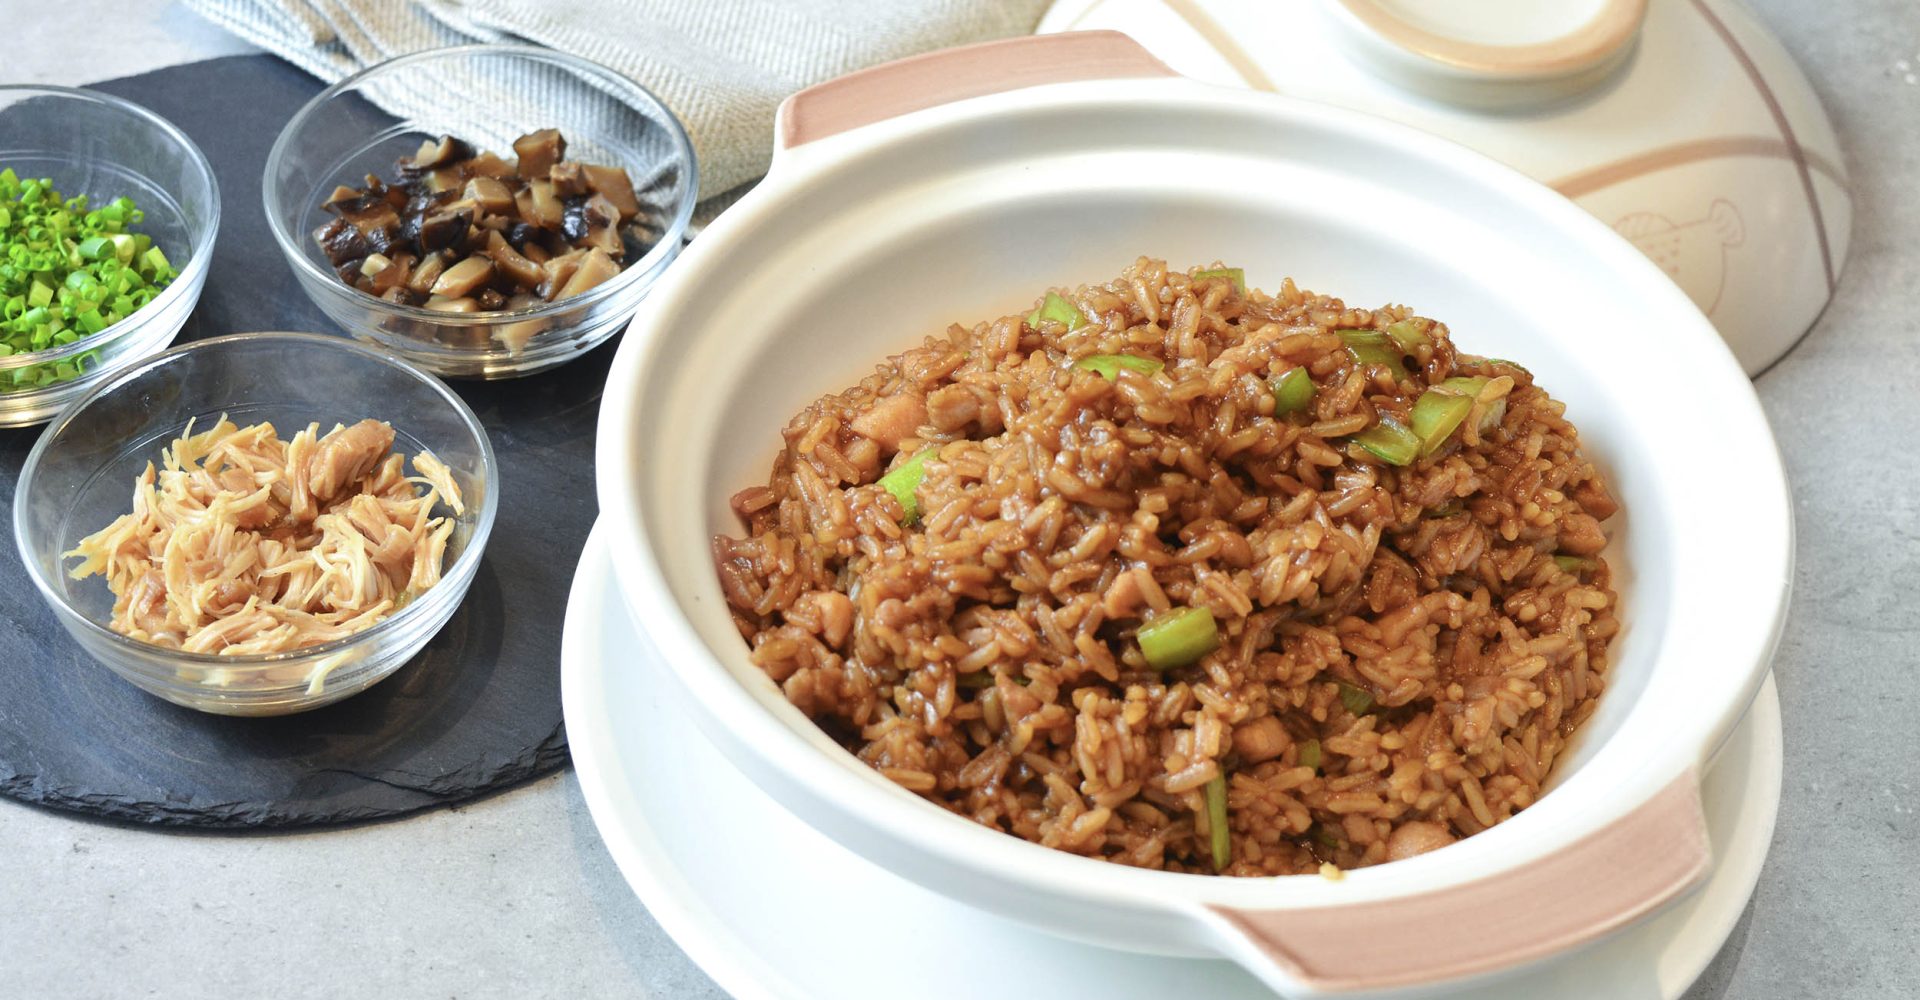 Xiu Rice - Fried rice with shredded chicken in abalone sauce